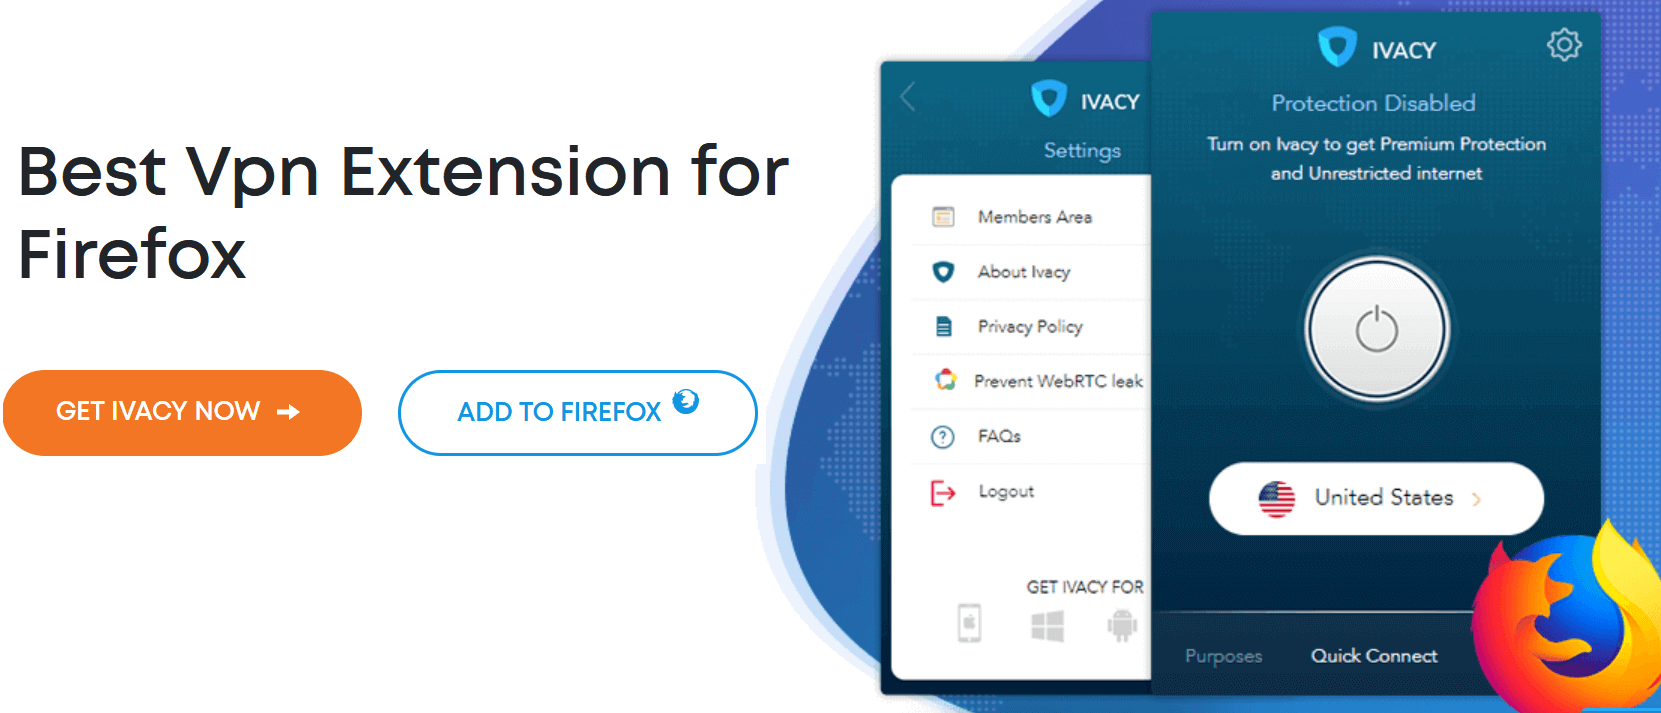 How to get VPN for Firefox